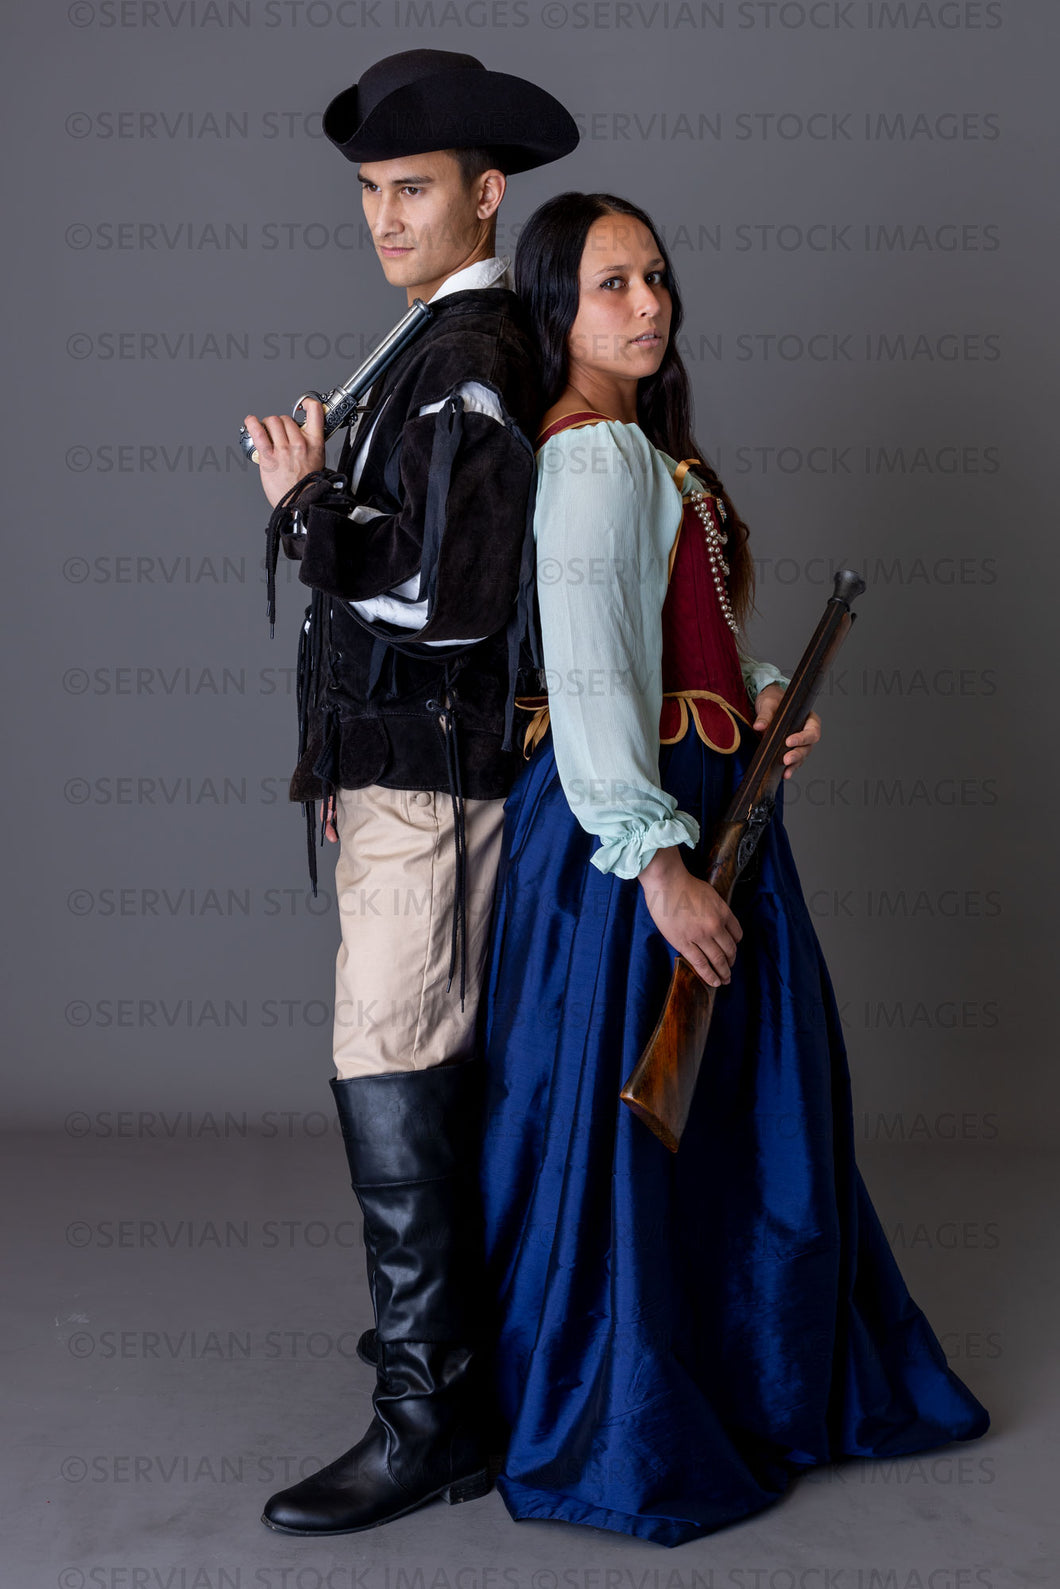 Pirate couple holding weapons against a grey backdrop (Sylvia and Lukas 5981)